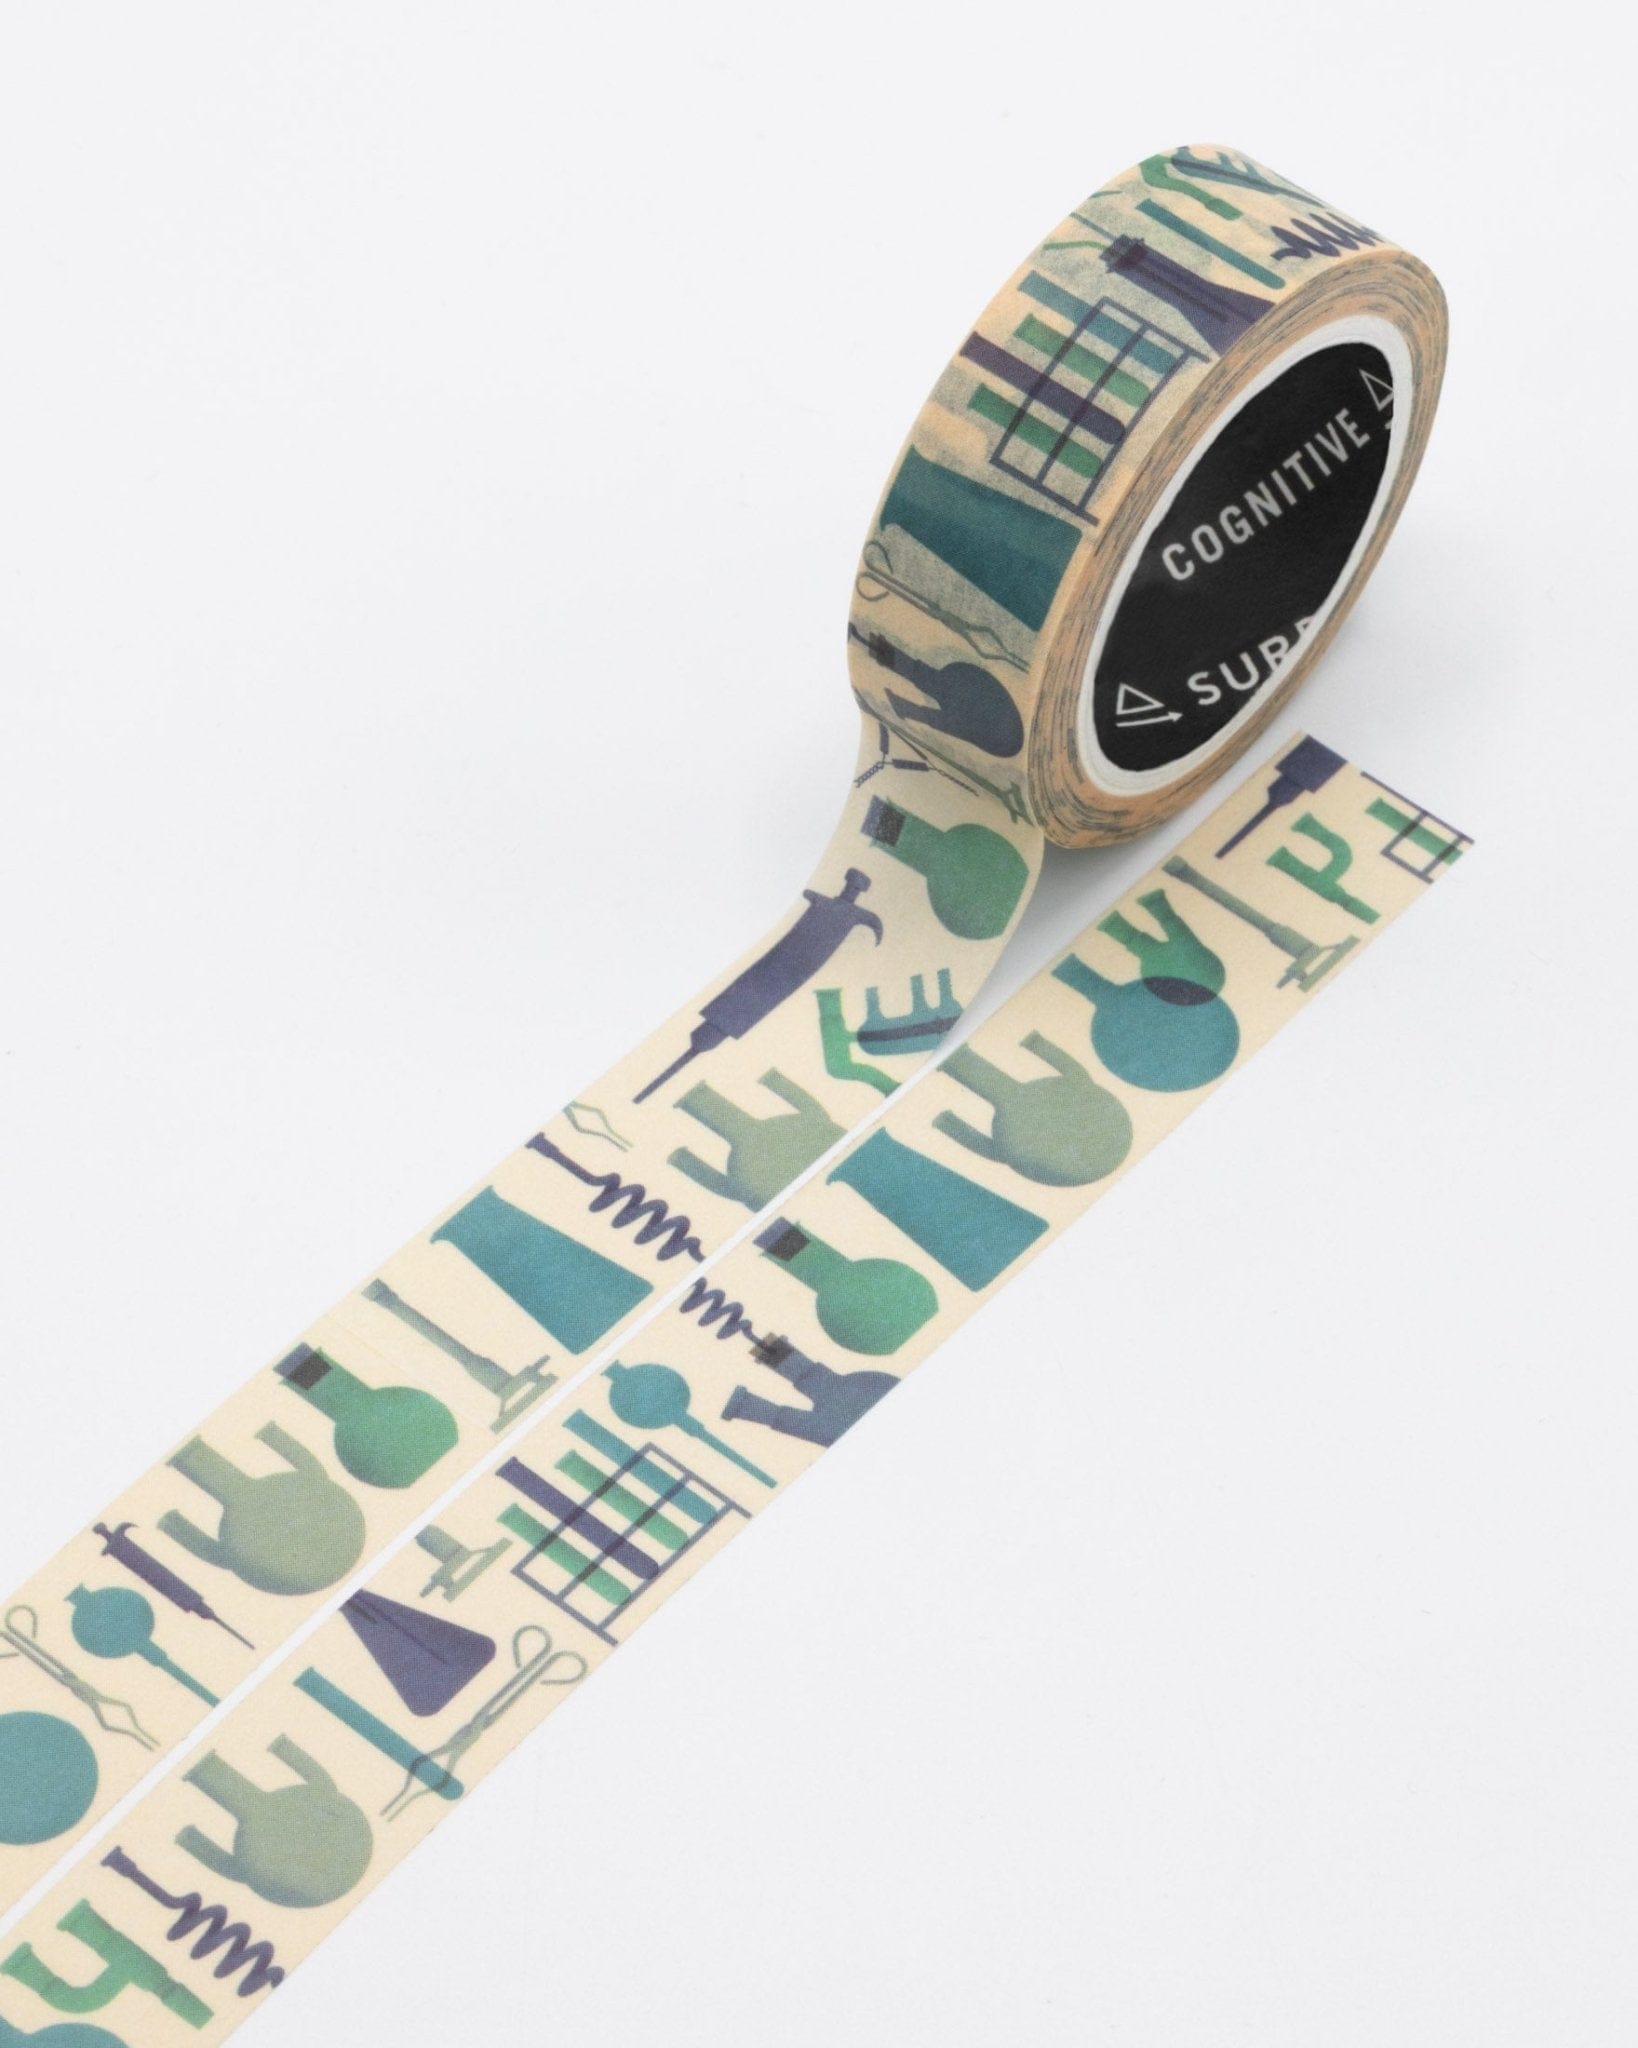 5 Simple Washi Tape Ideas at Eclectically Vintage